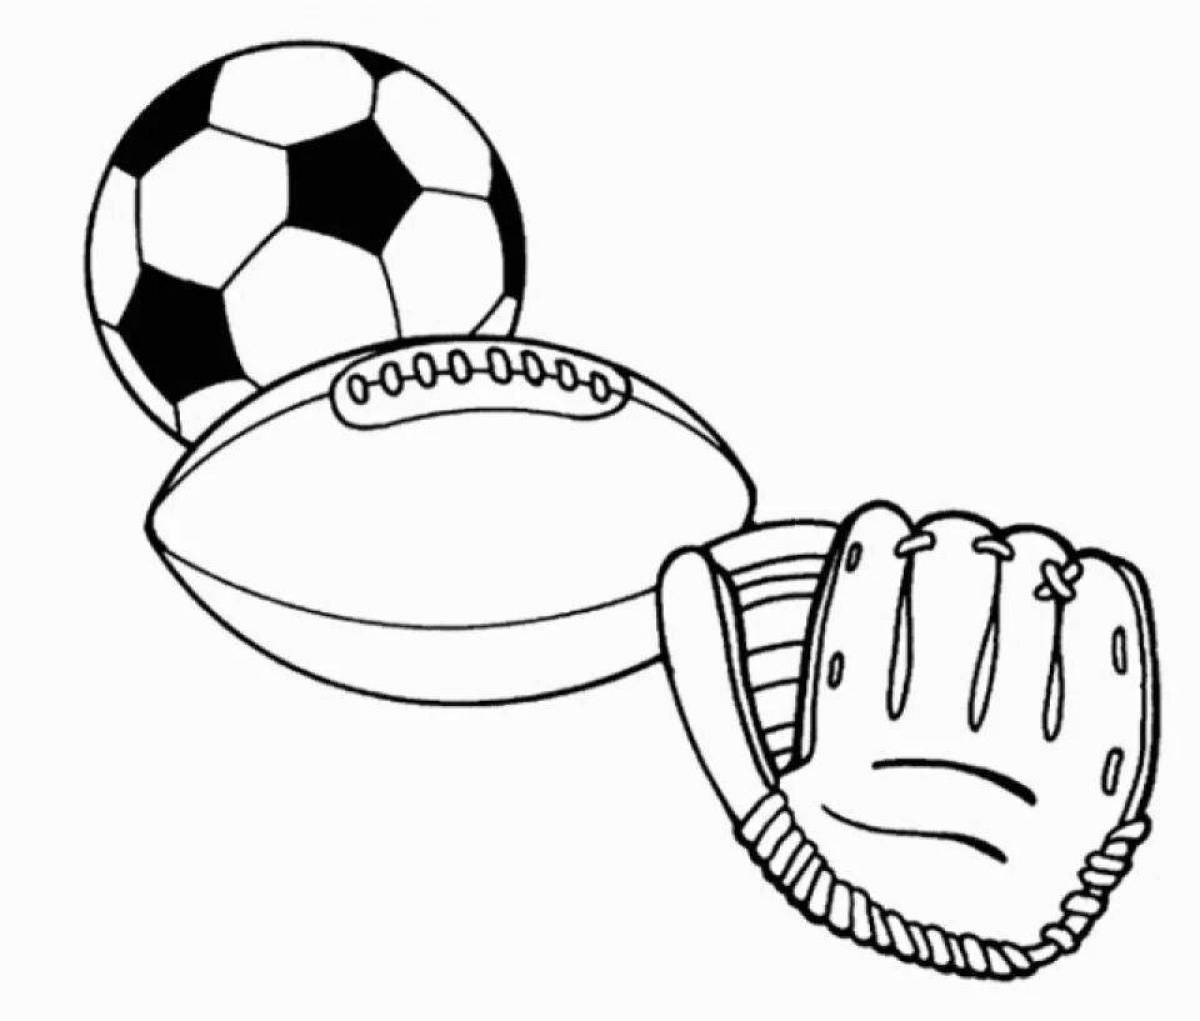 Intriguing sports equipment coloring page